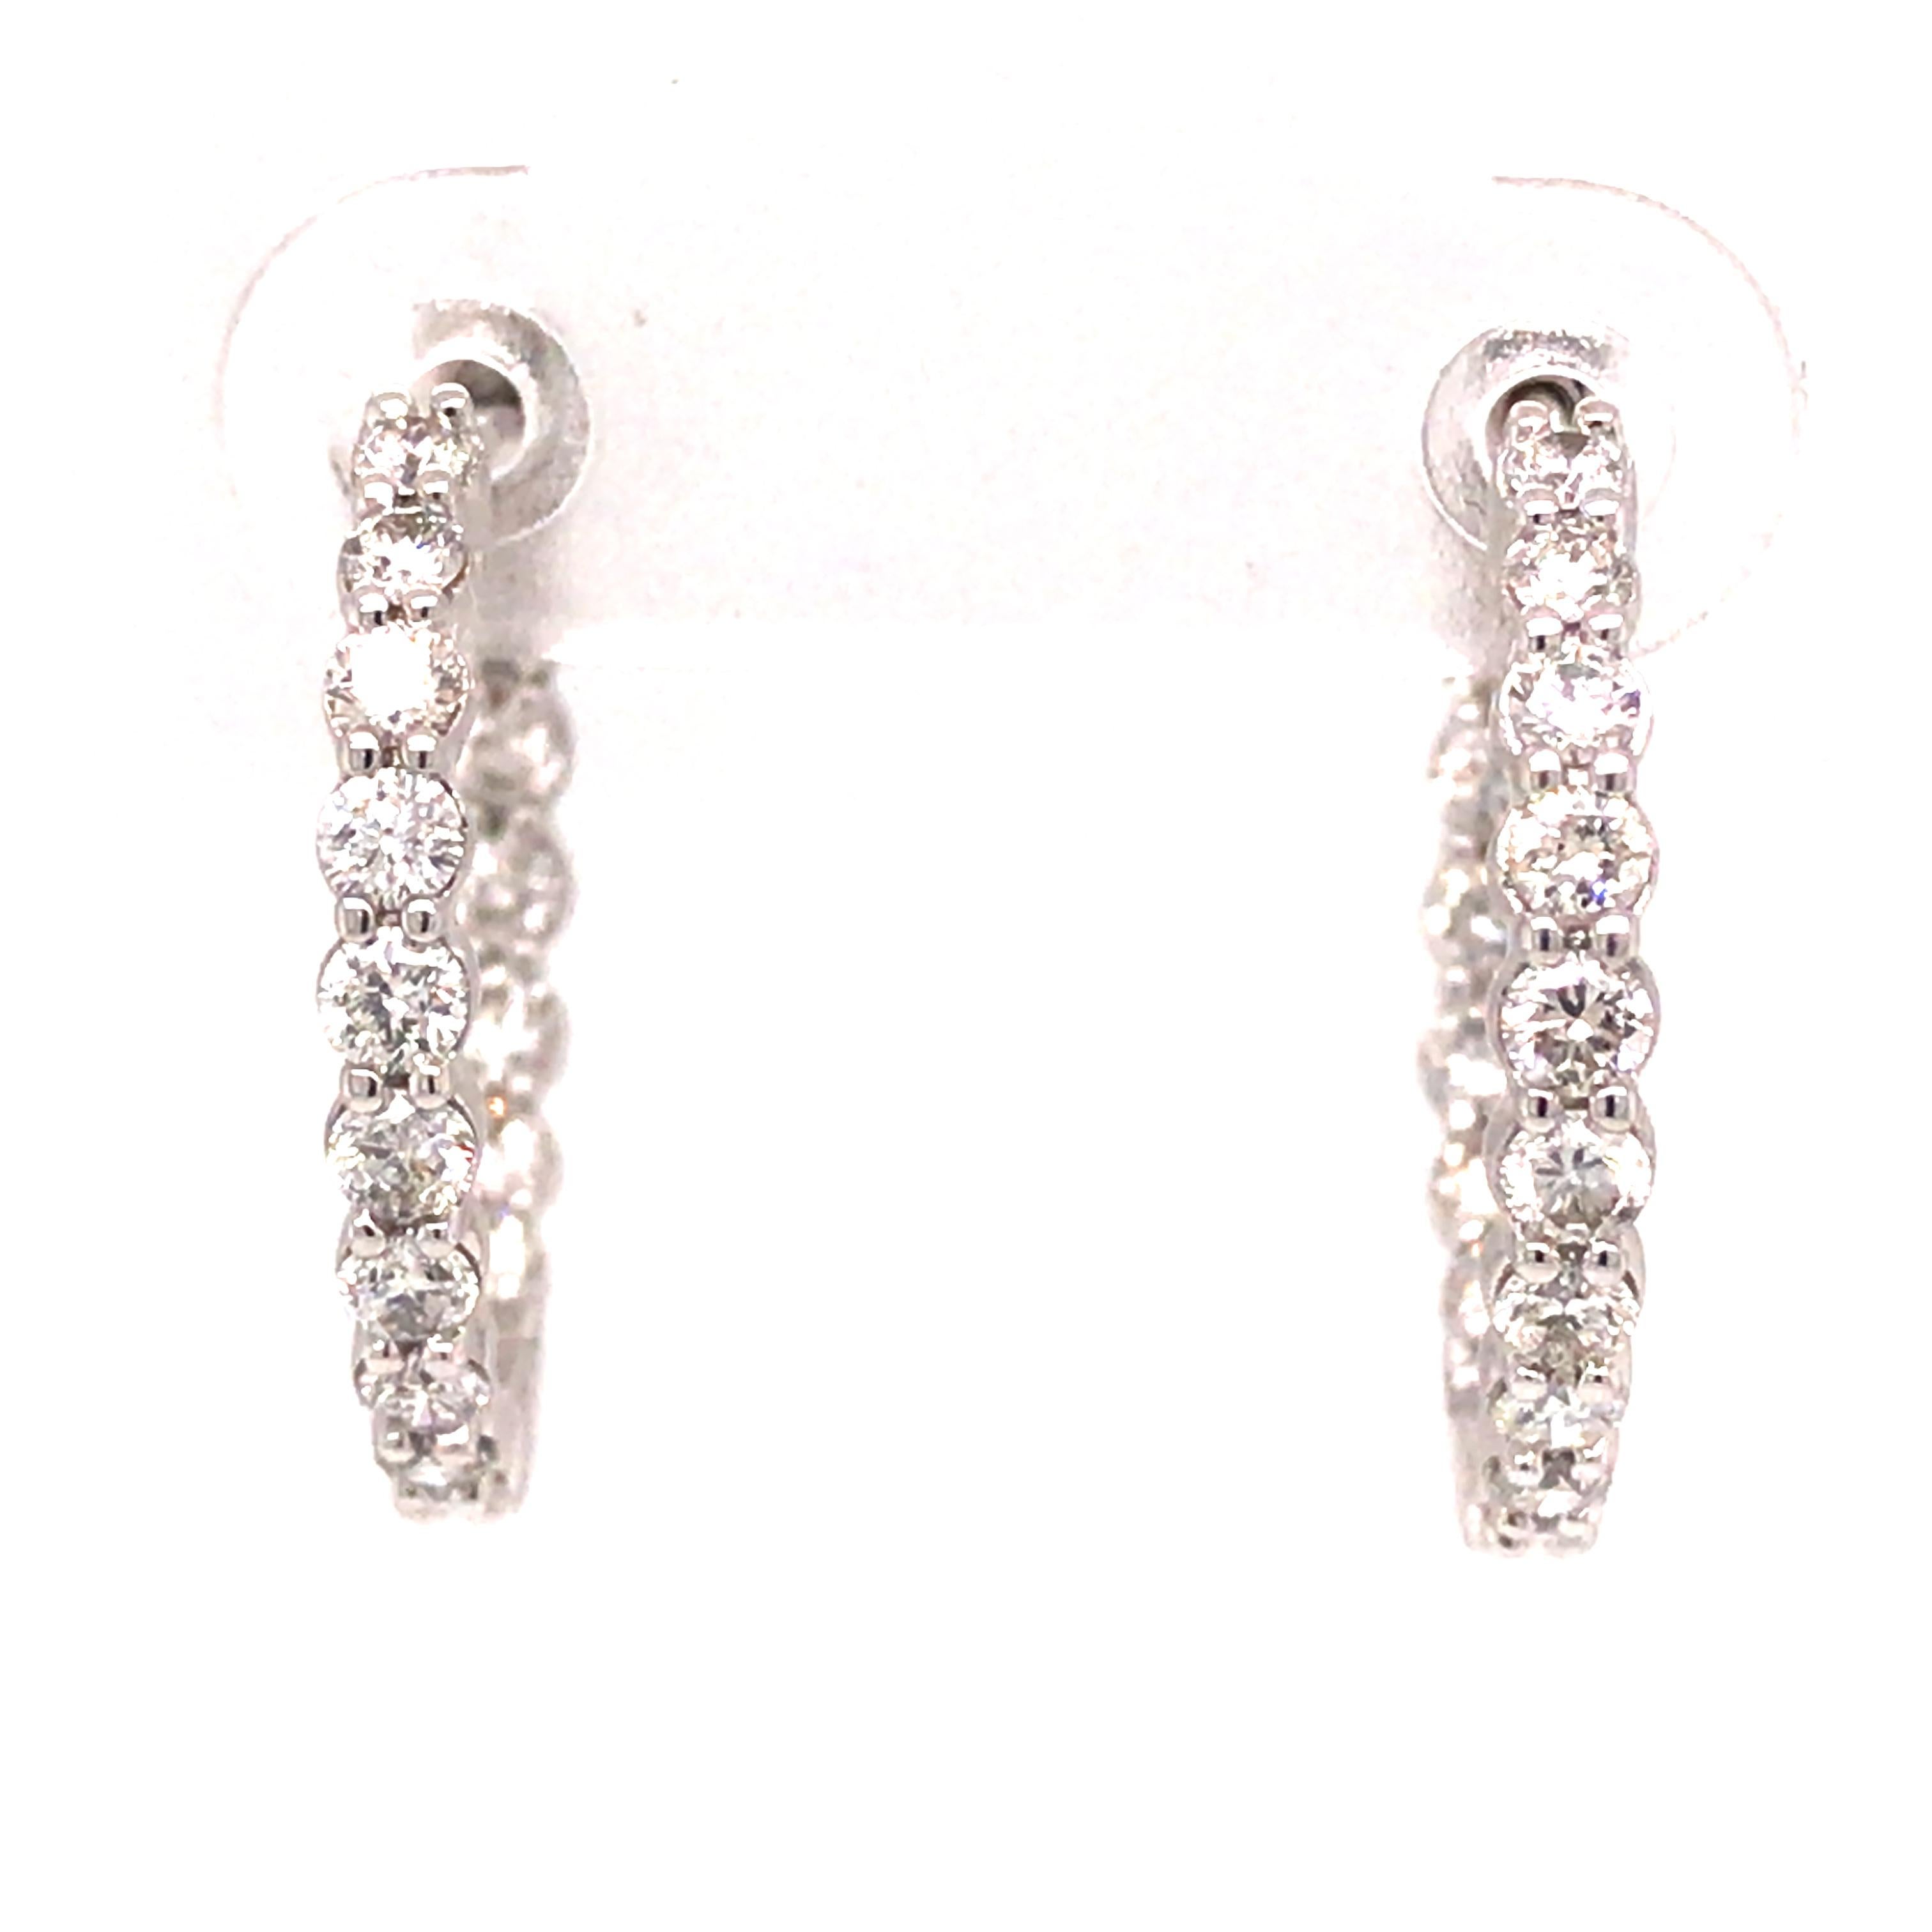 Diamond In/Out Hoop Earrings in 14K White Gold.  Round Brilliant Cut Diamonds weighing 1.00 carat total weight, G-H in color and VS in clarity are expertly set.  The Earrings measure 3/4inch in diameter.  2.95 grams.